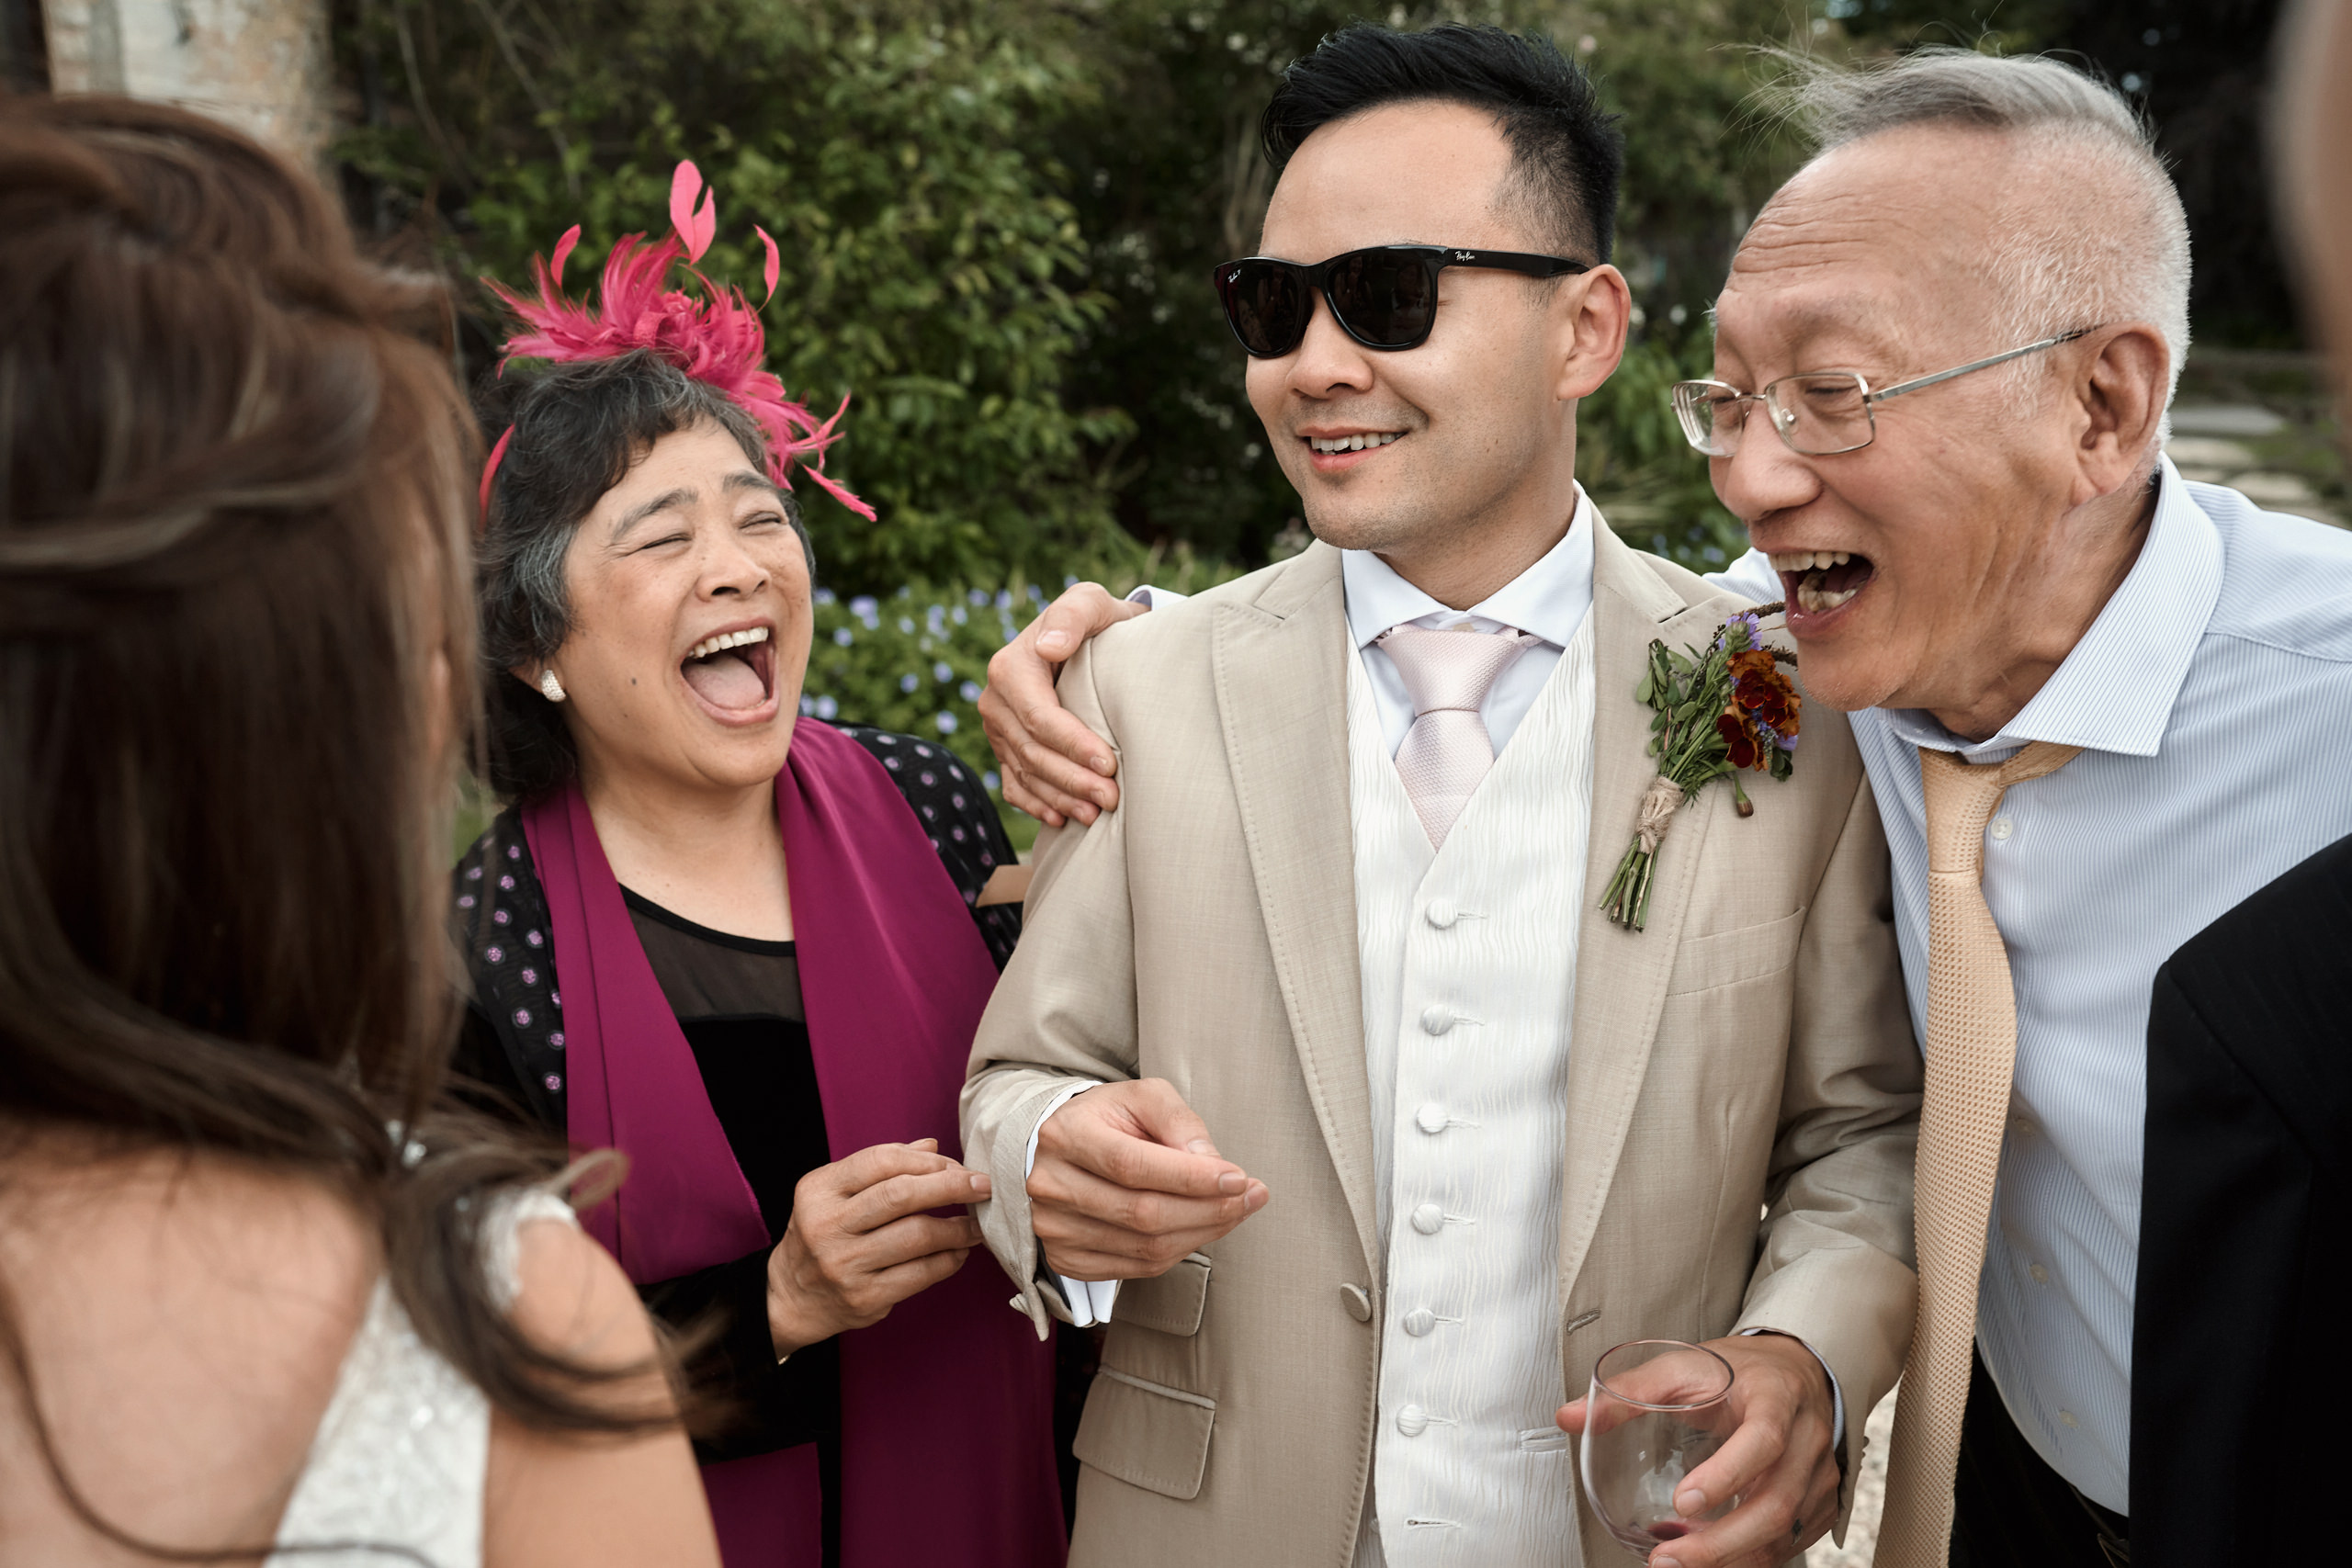 People cracking up at a wedding.